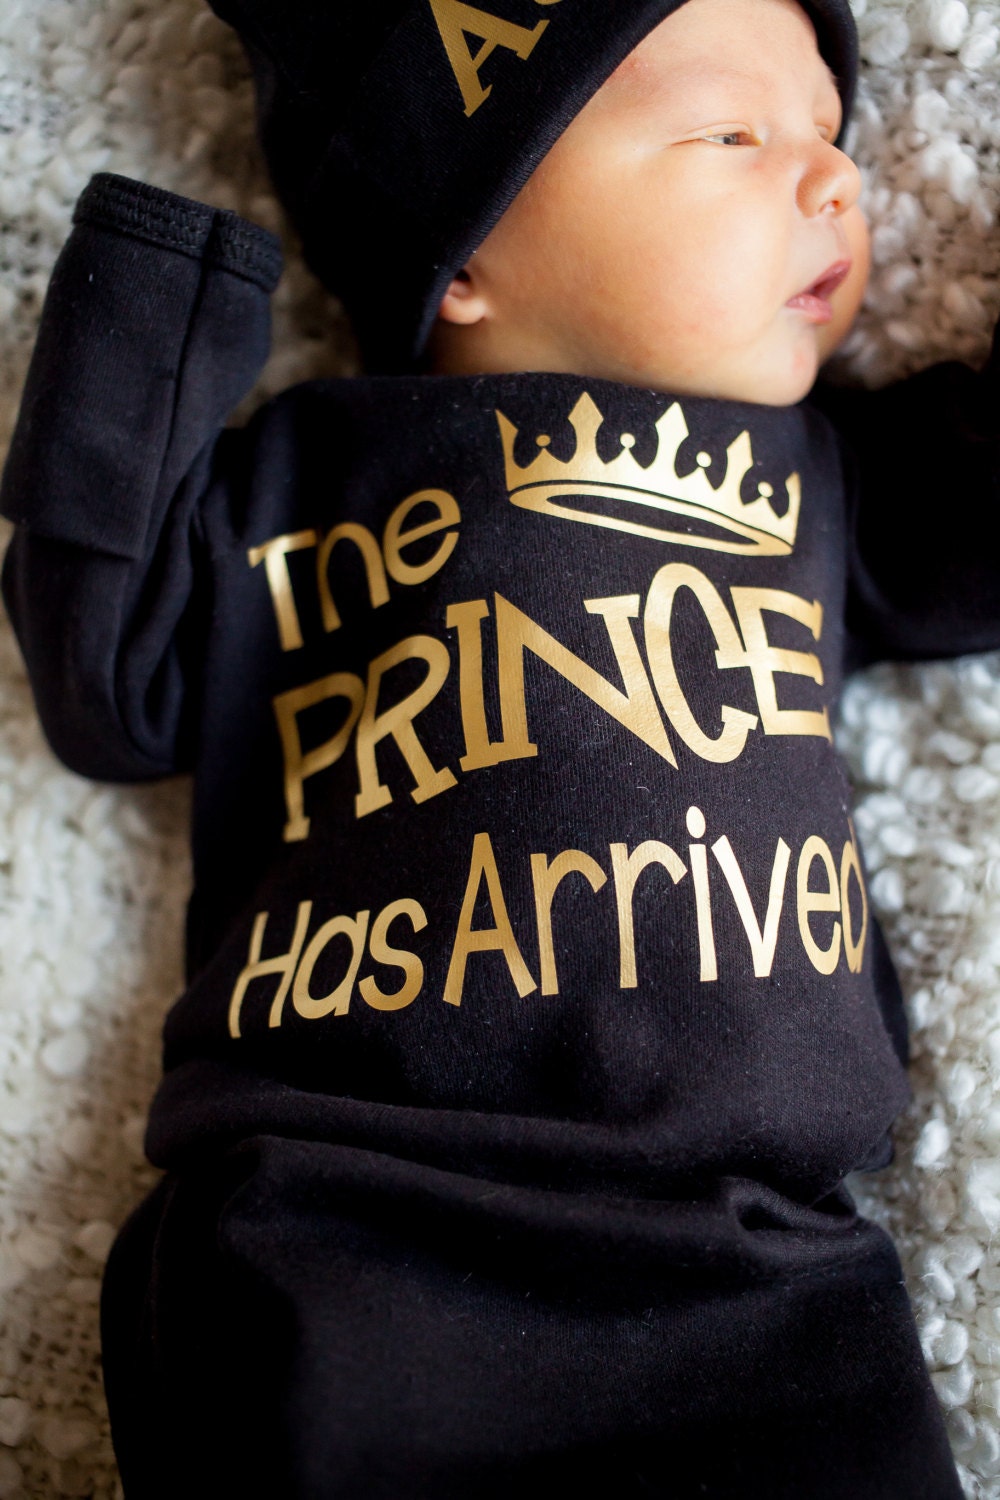 prince newborn outfit